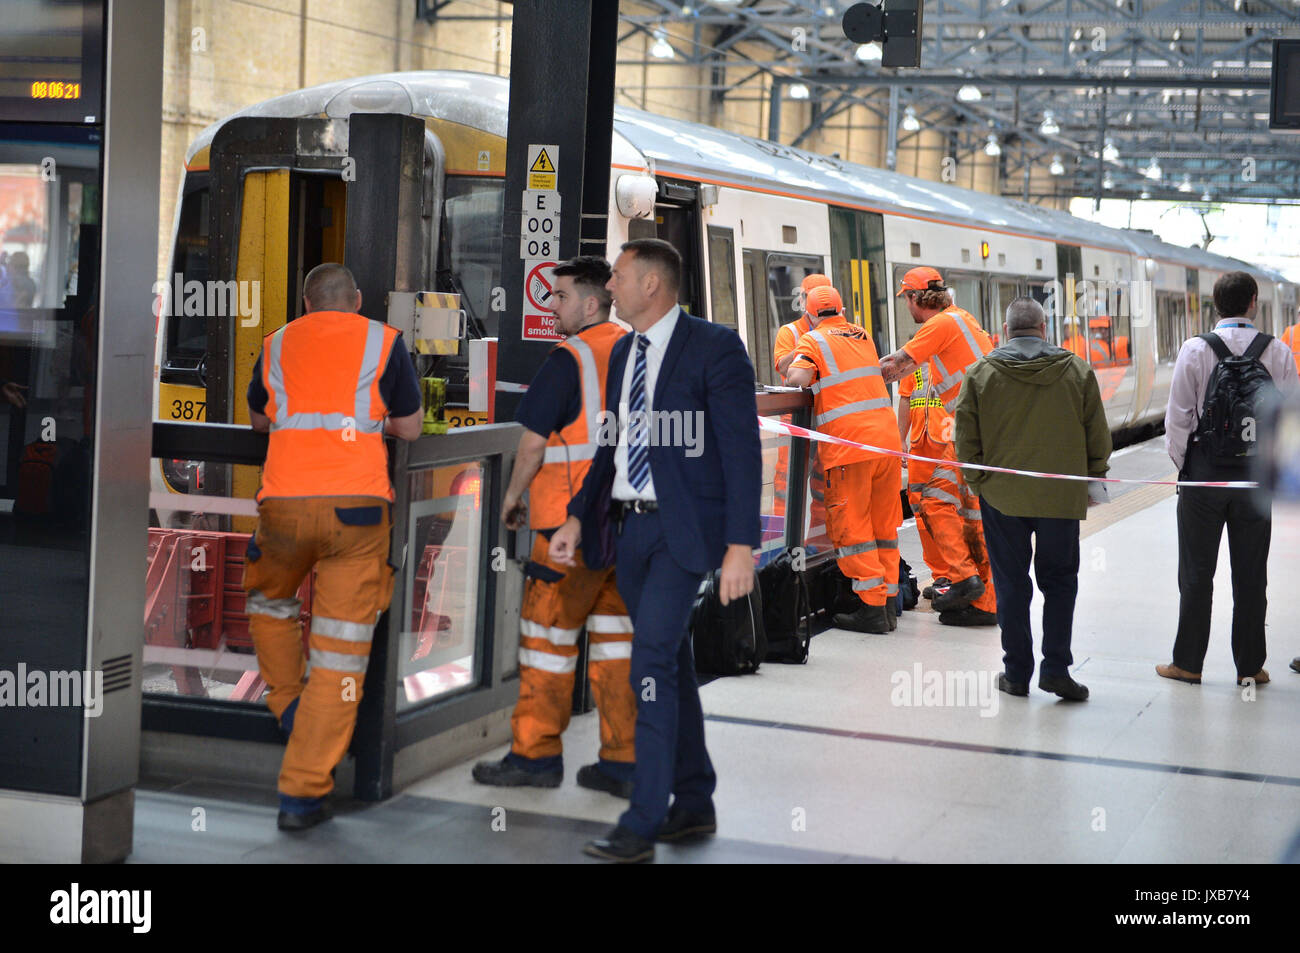 Railway Staff High Resolution Stock Photography and Images - Alamy